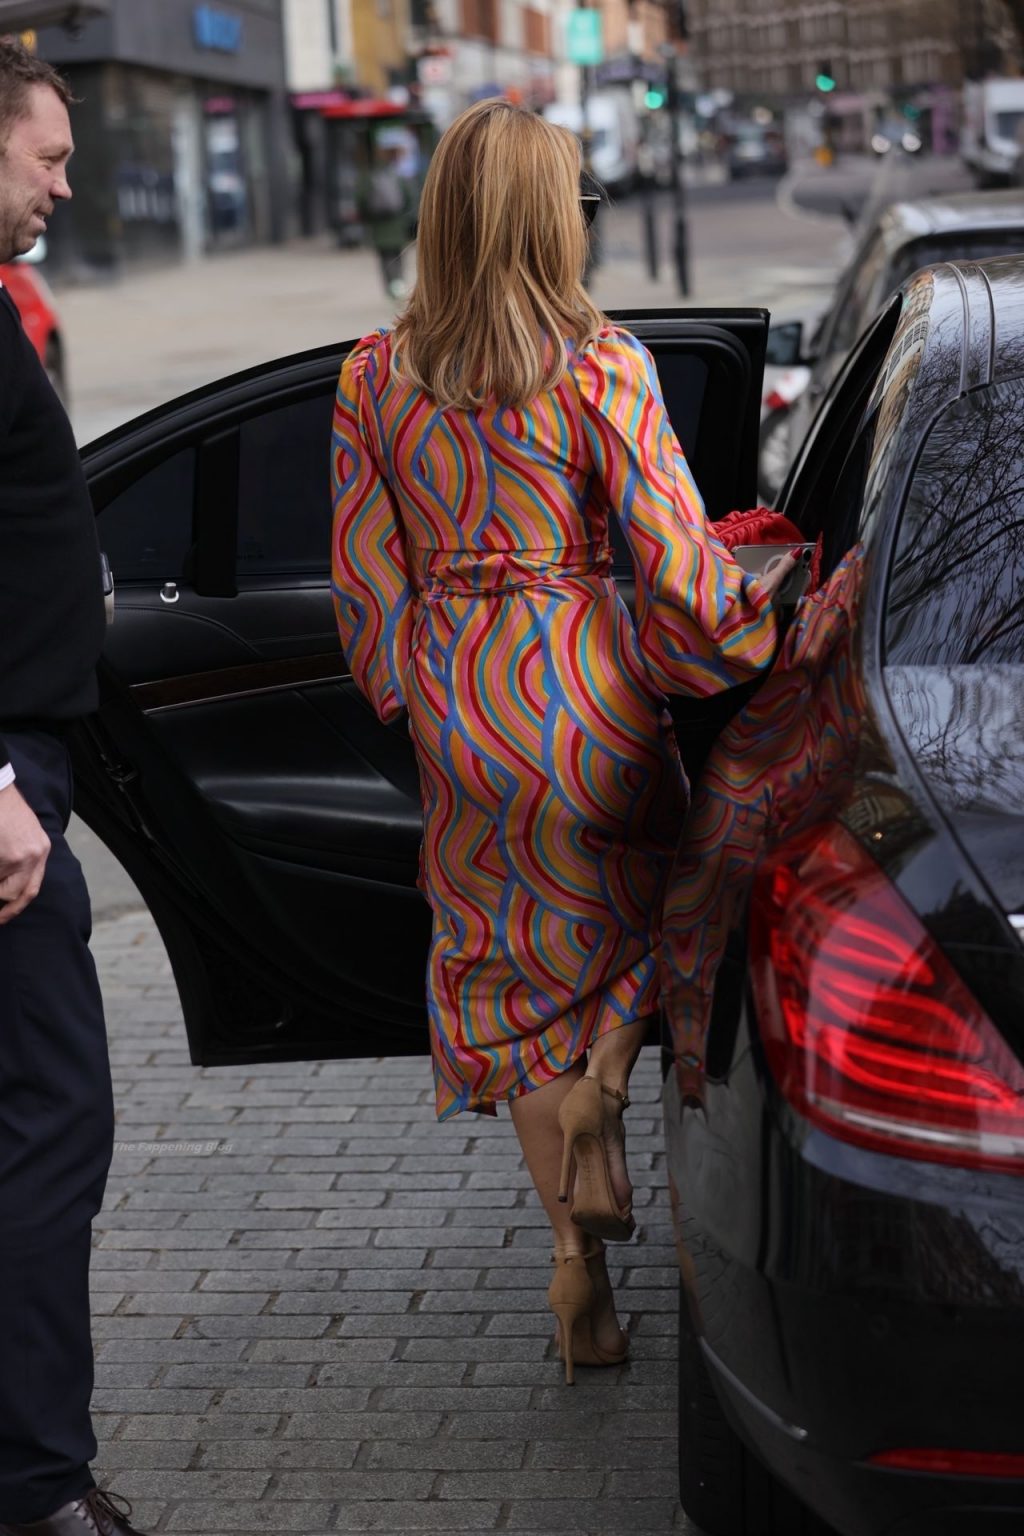 Leggy Amanda Holden is Spotted at Global Studios (66 Photos)